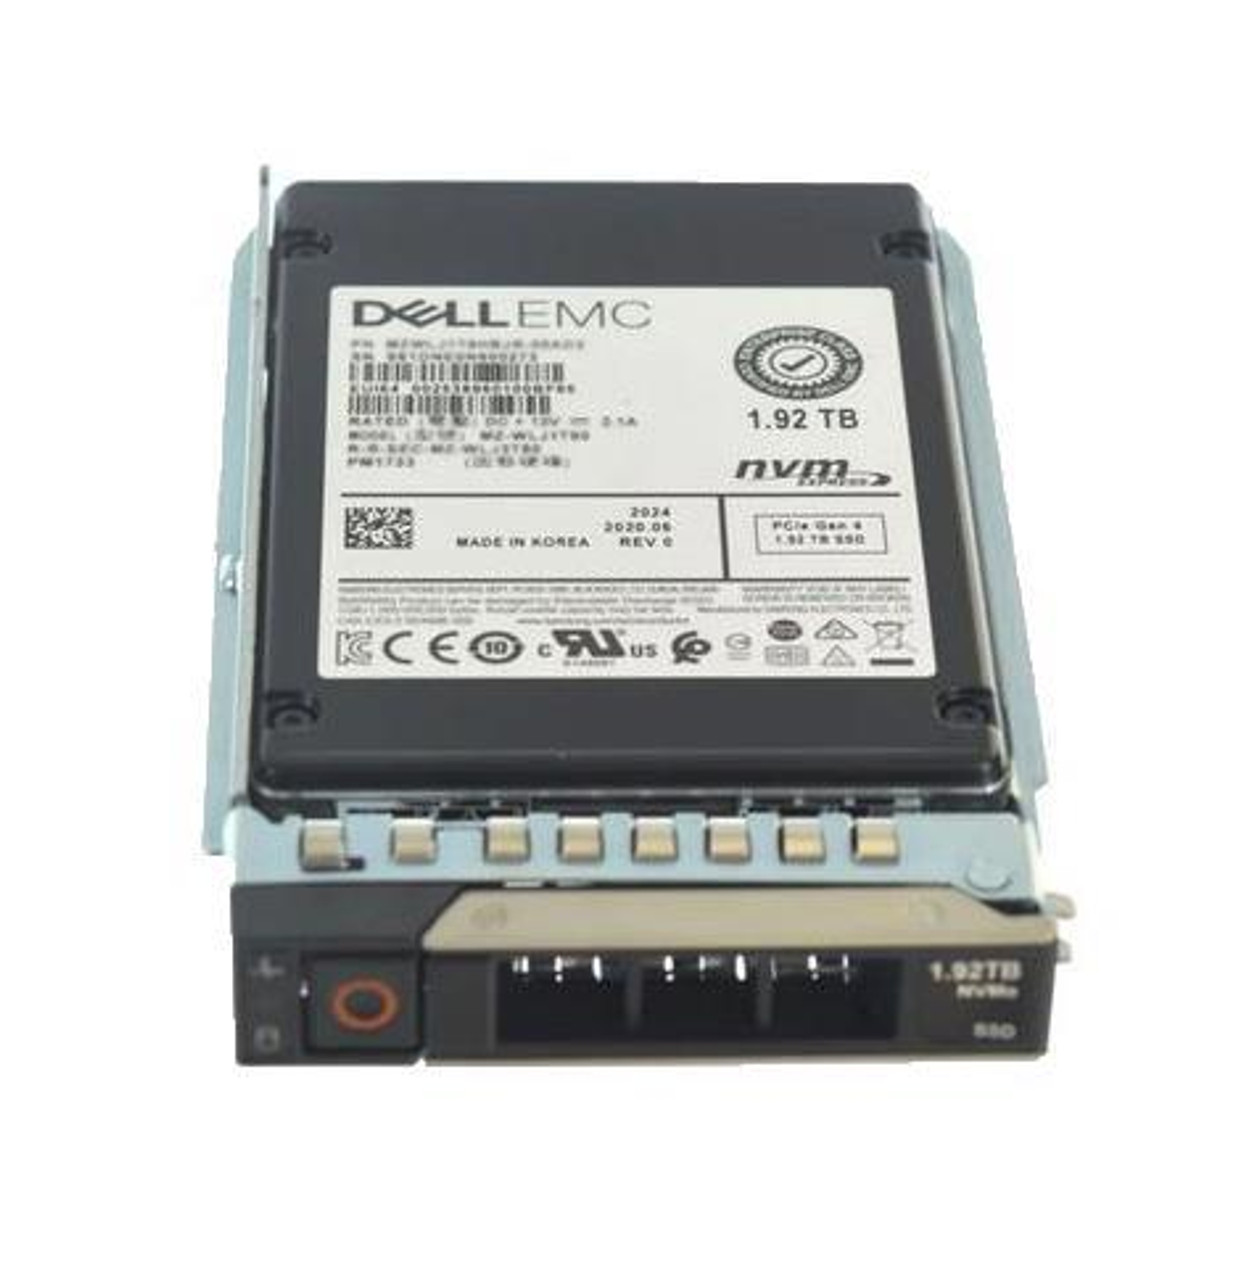 400-BGIZ Dell 1.92TB PCI Express NVMe (SED) 2.5-inch Internal Solid State Drive (SSD) for P1 25 x 2.5 Enclosure